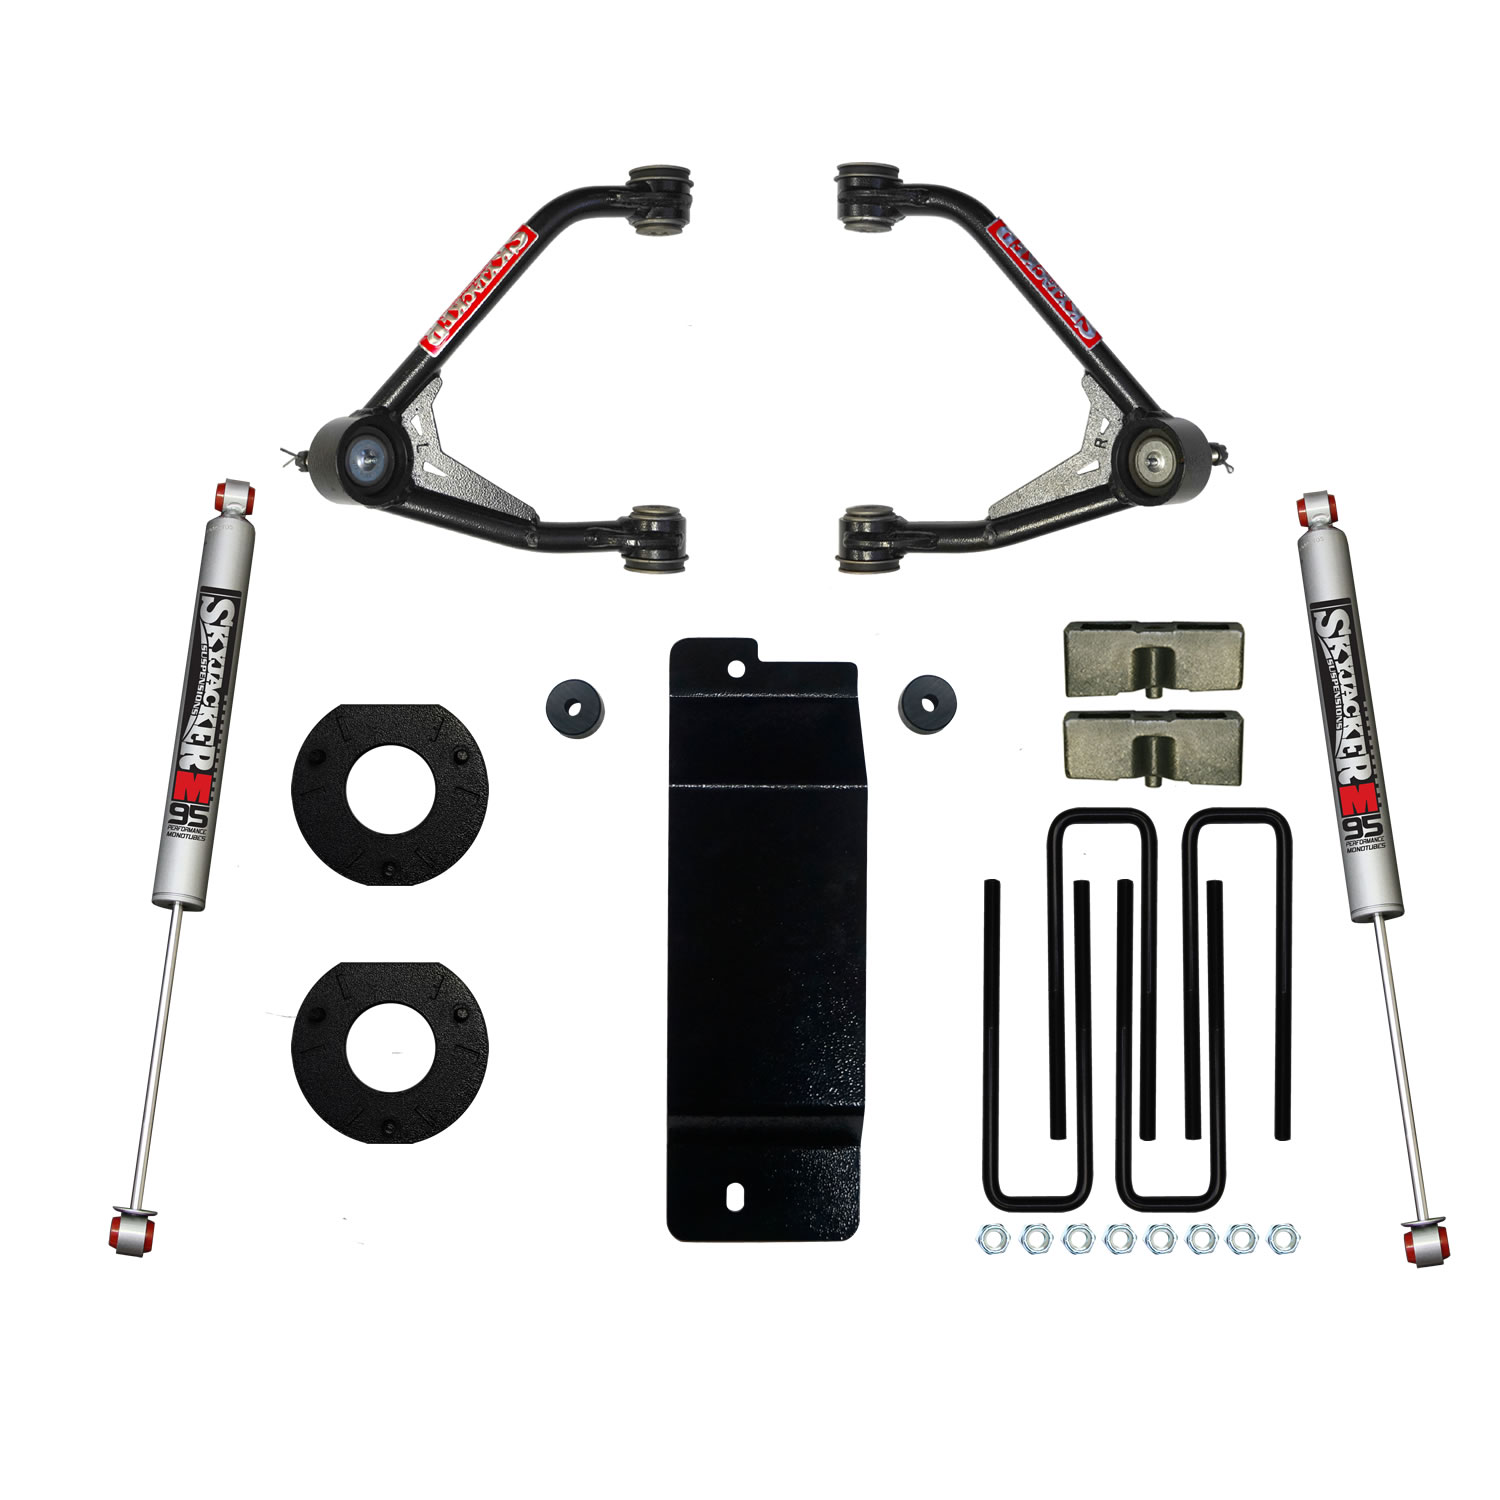 3.500-4.000 In. Upper Control Arm Lift Kit with M9500 Rear Shocks for 2014-2016 GM 1500 4WD